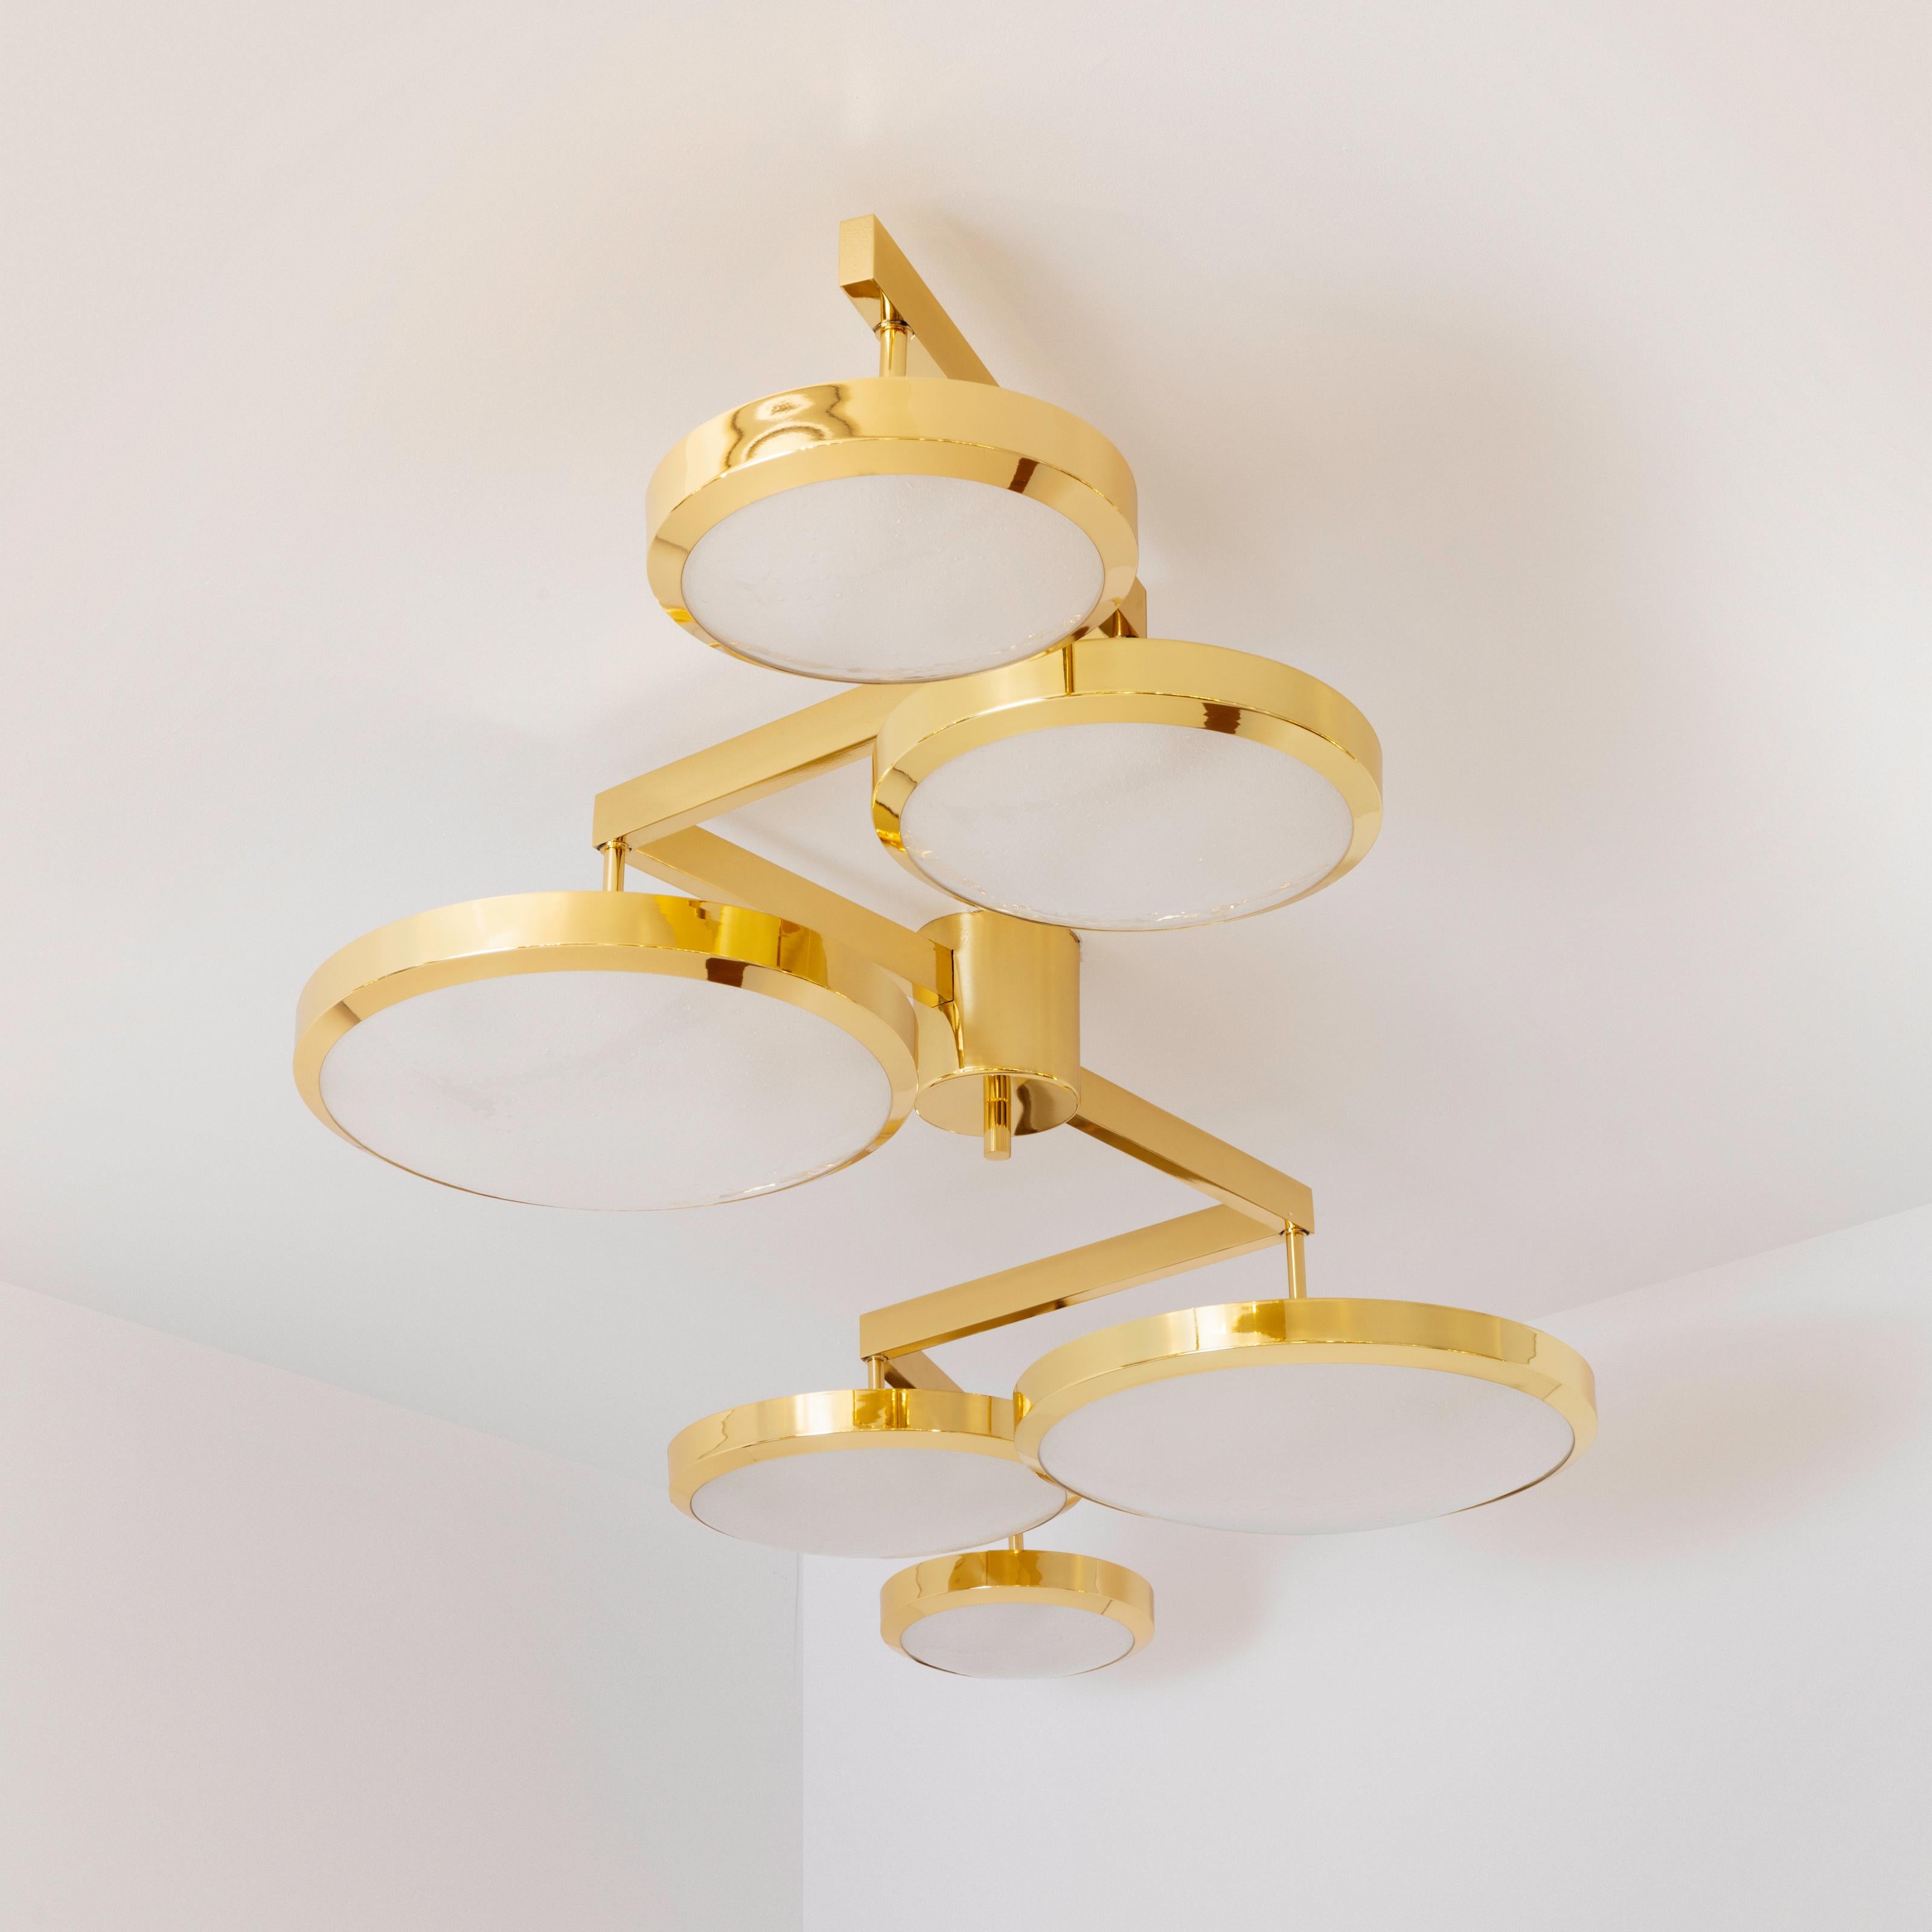 Contemporary Geometria Sospesa Ceiling Light by Gaspare Asaro-Polished Nickel Finish For Sale